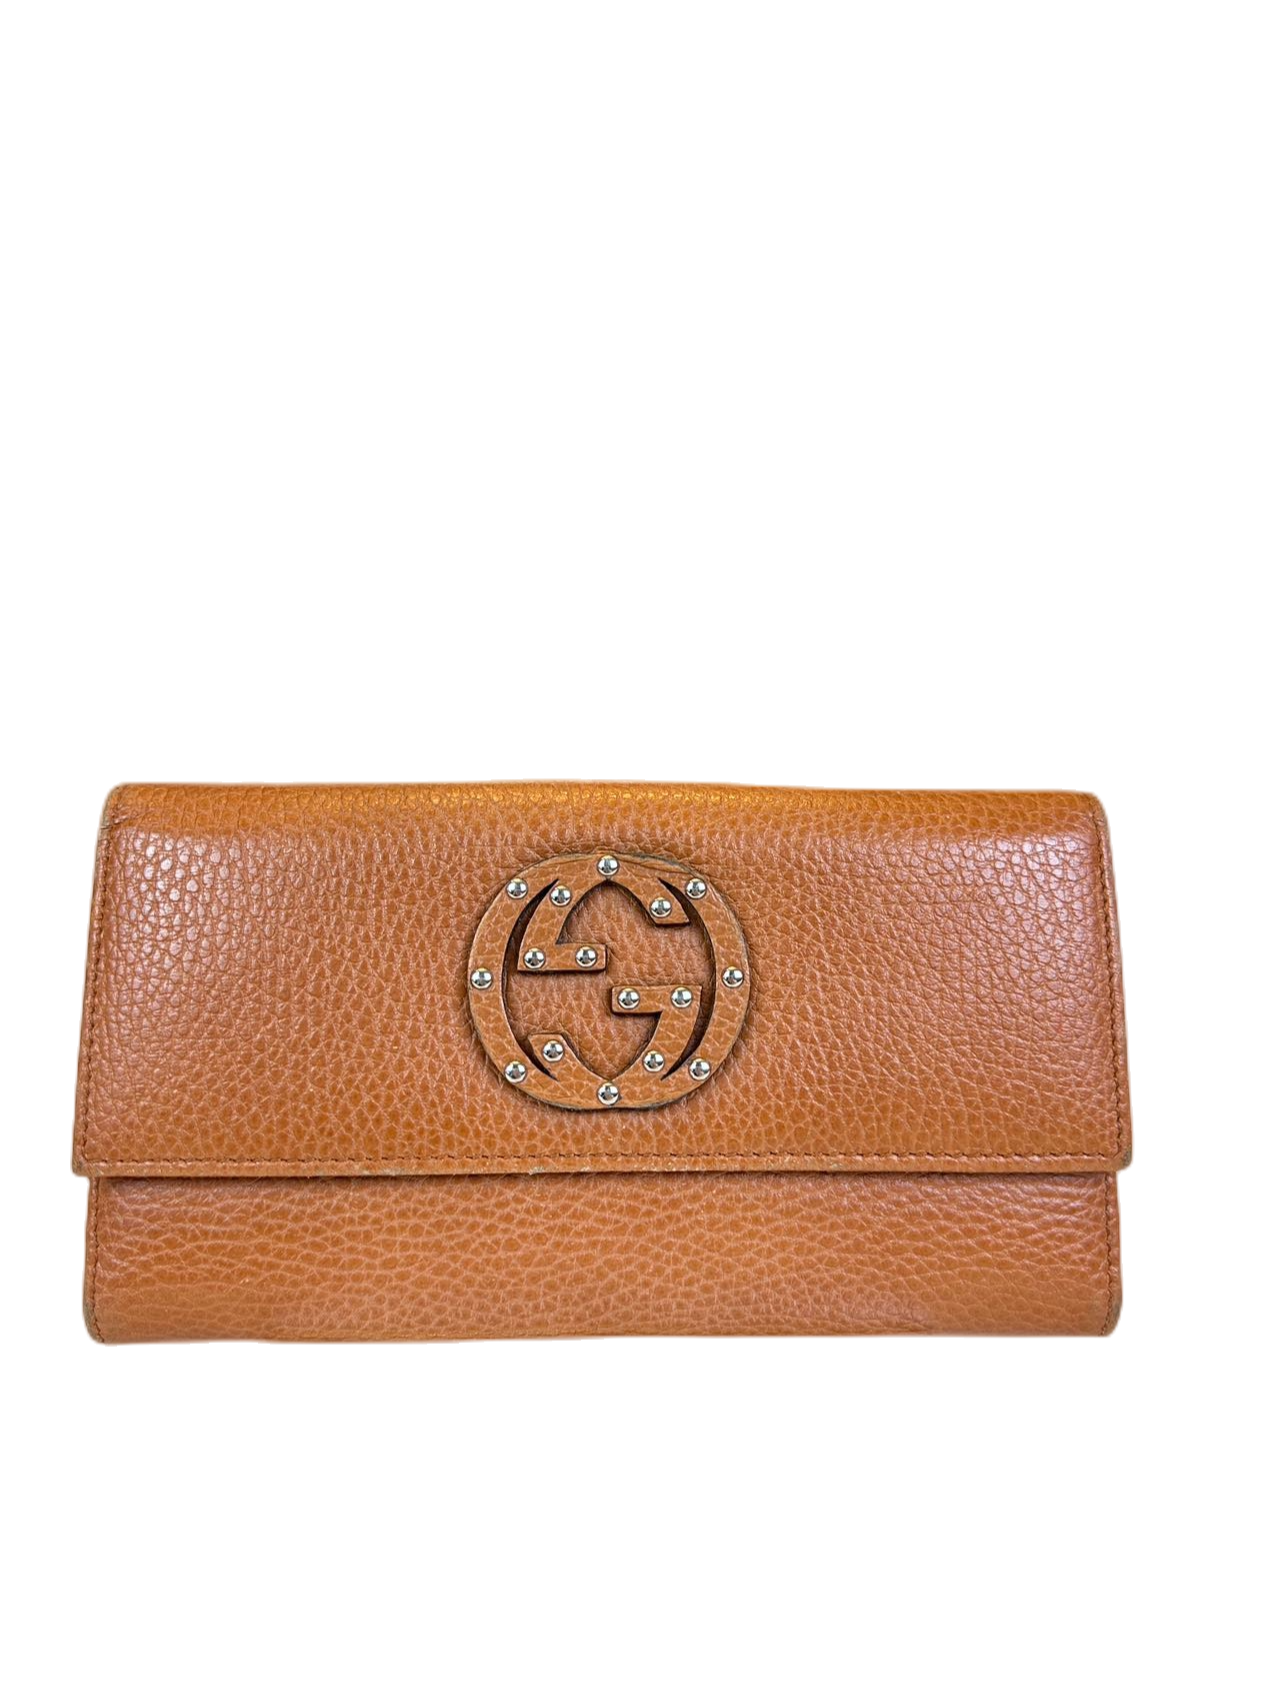 Preloved Gucci GG Logo Brown Leather Wallet